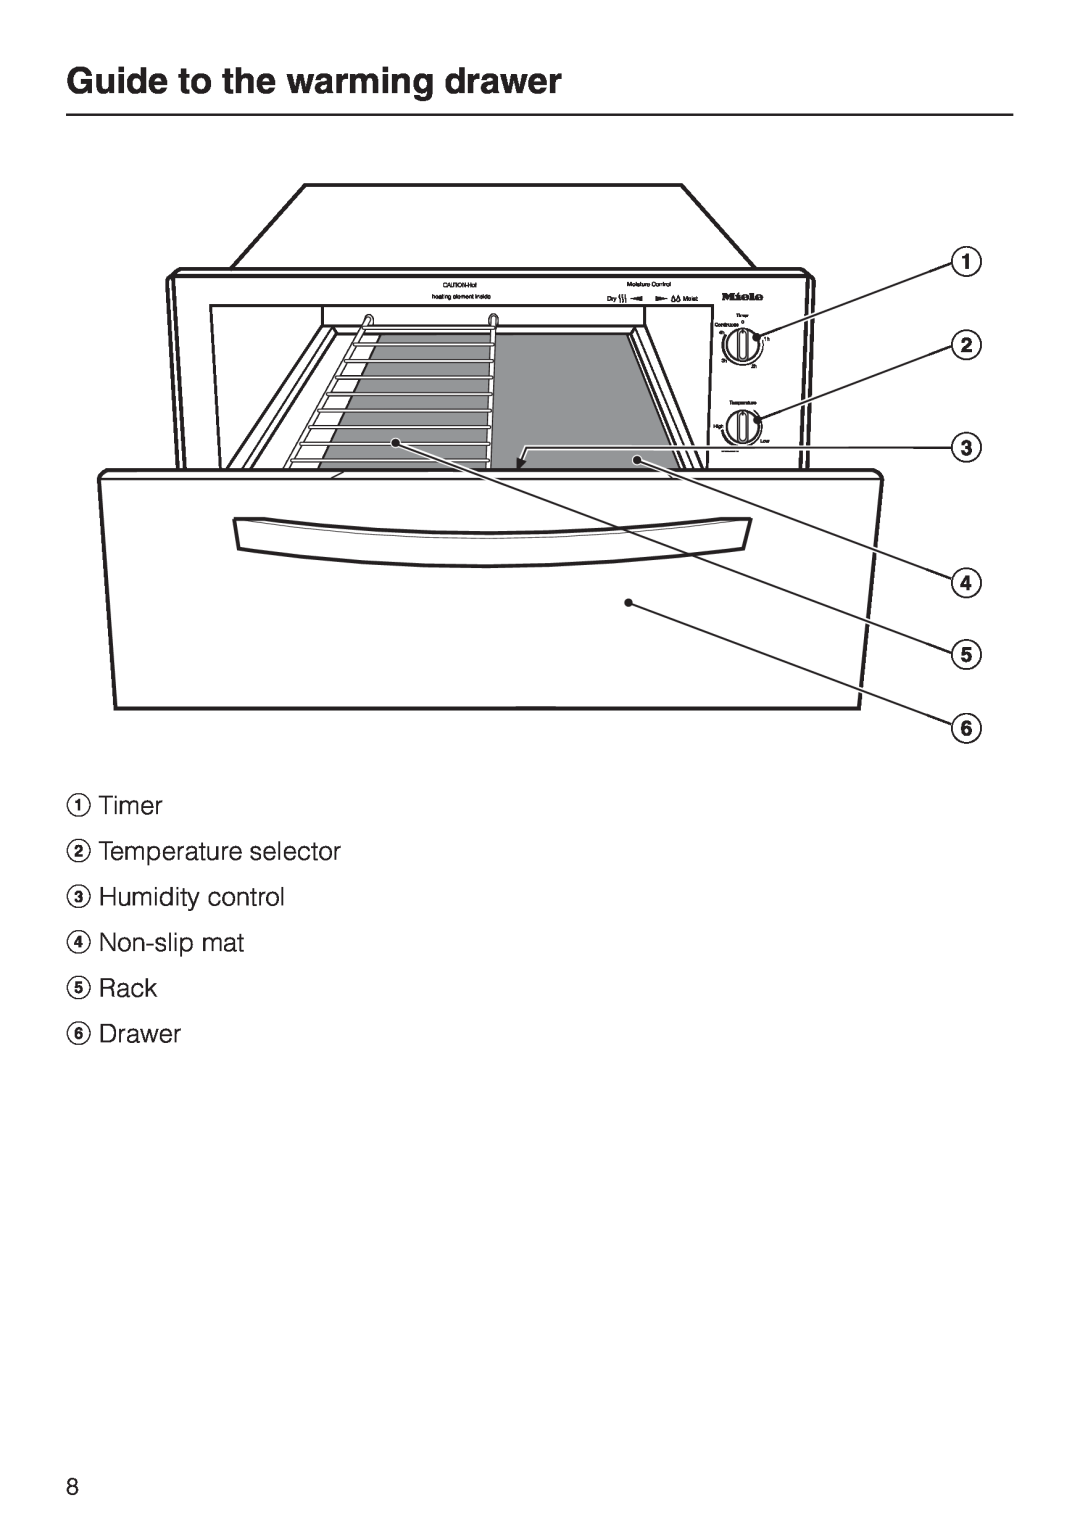 Miele ESW 4800, ESW4820 Guide to the warming drawer, a Timer b Temperature selector c Humidity control d Non-slip mat 